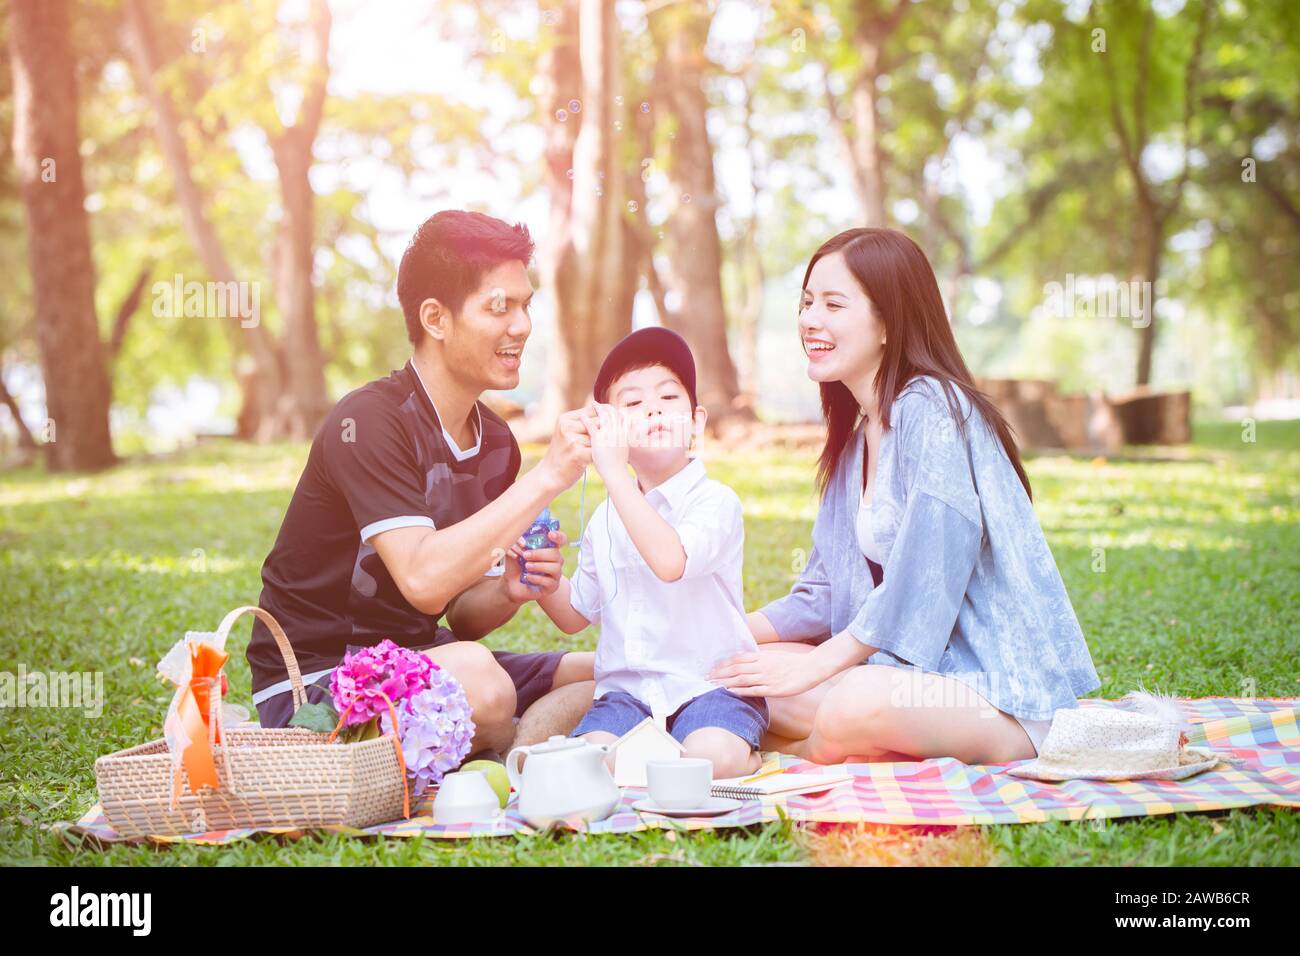 young family playing with child kid outdoor park lovely lifestyle and living with nature Stock Photo